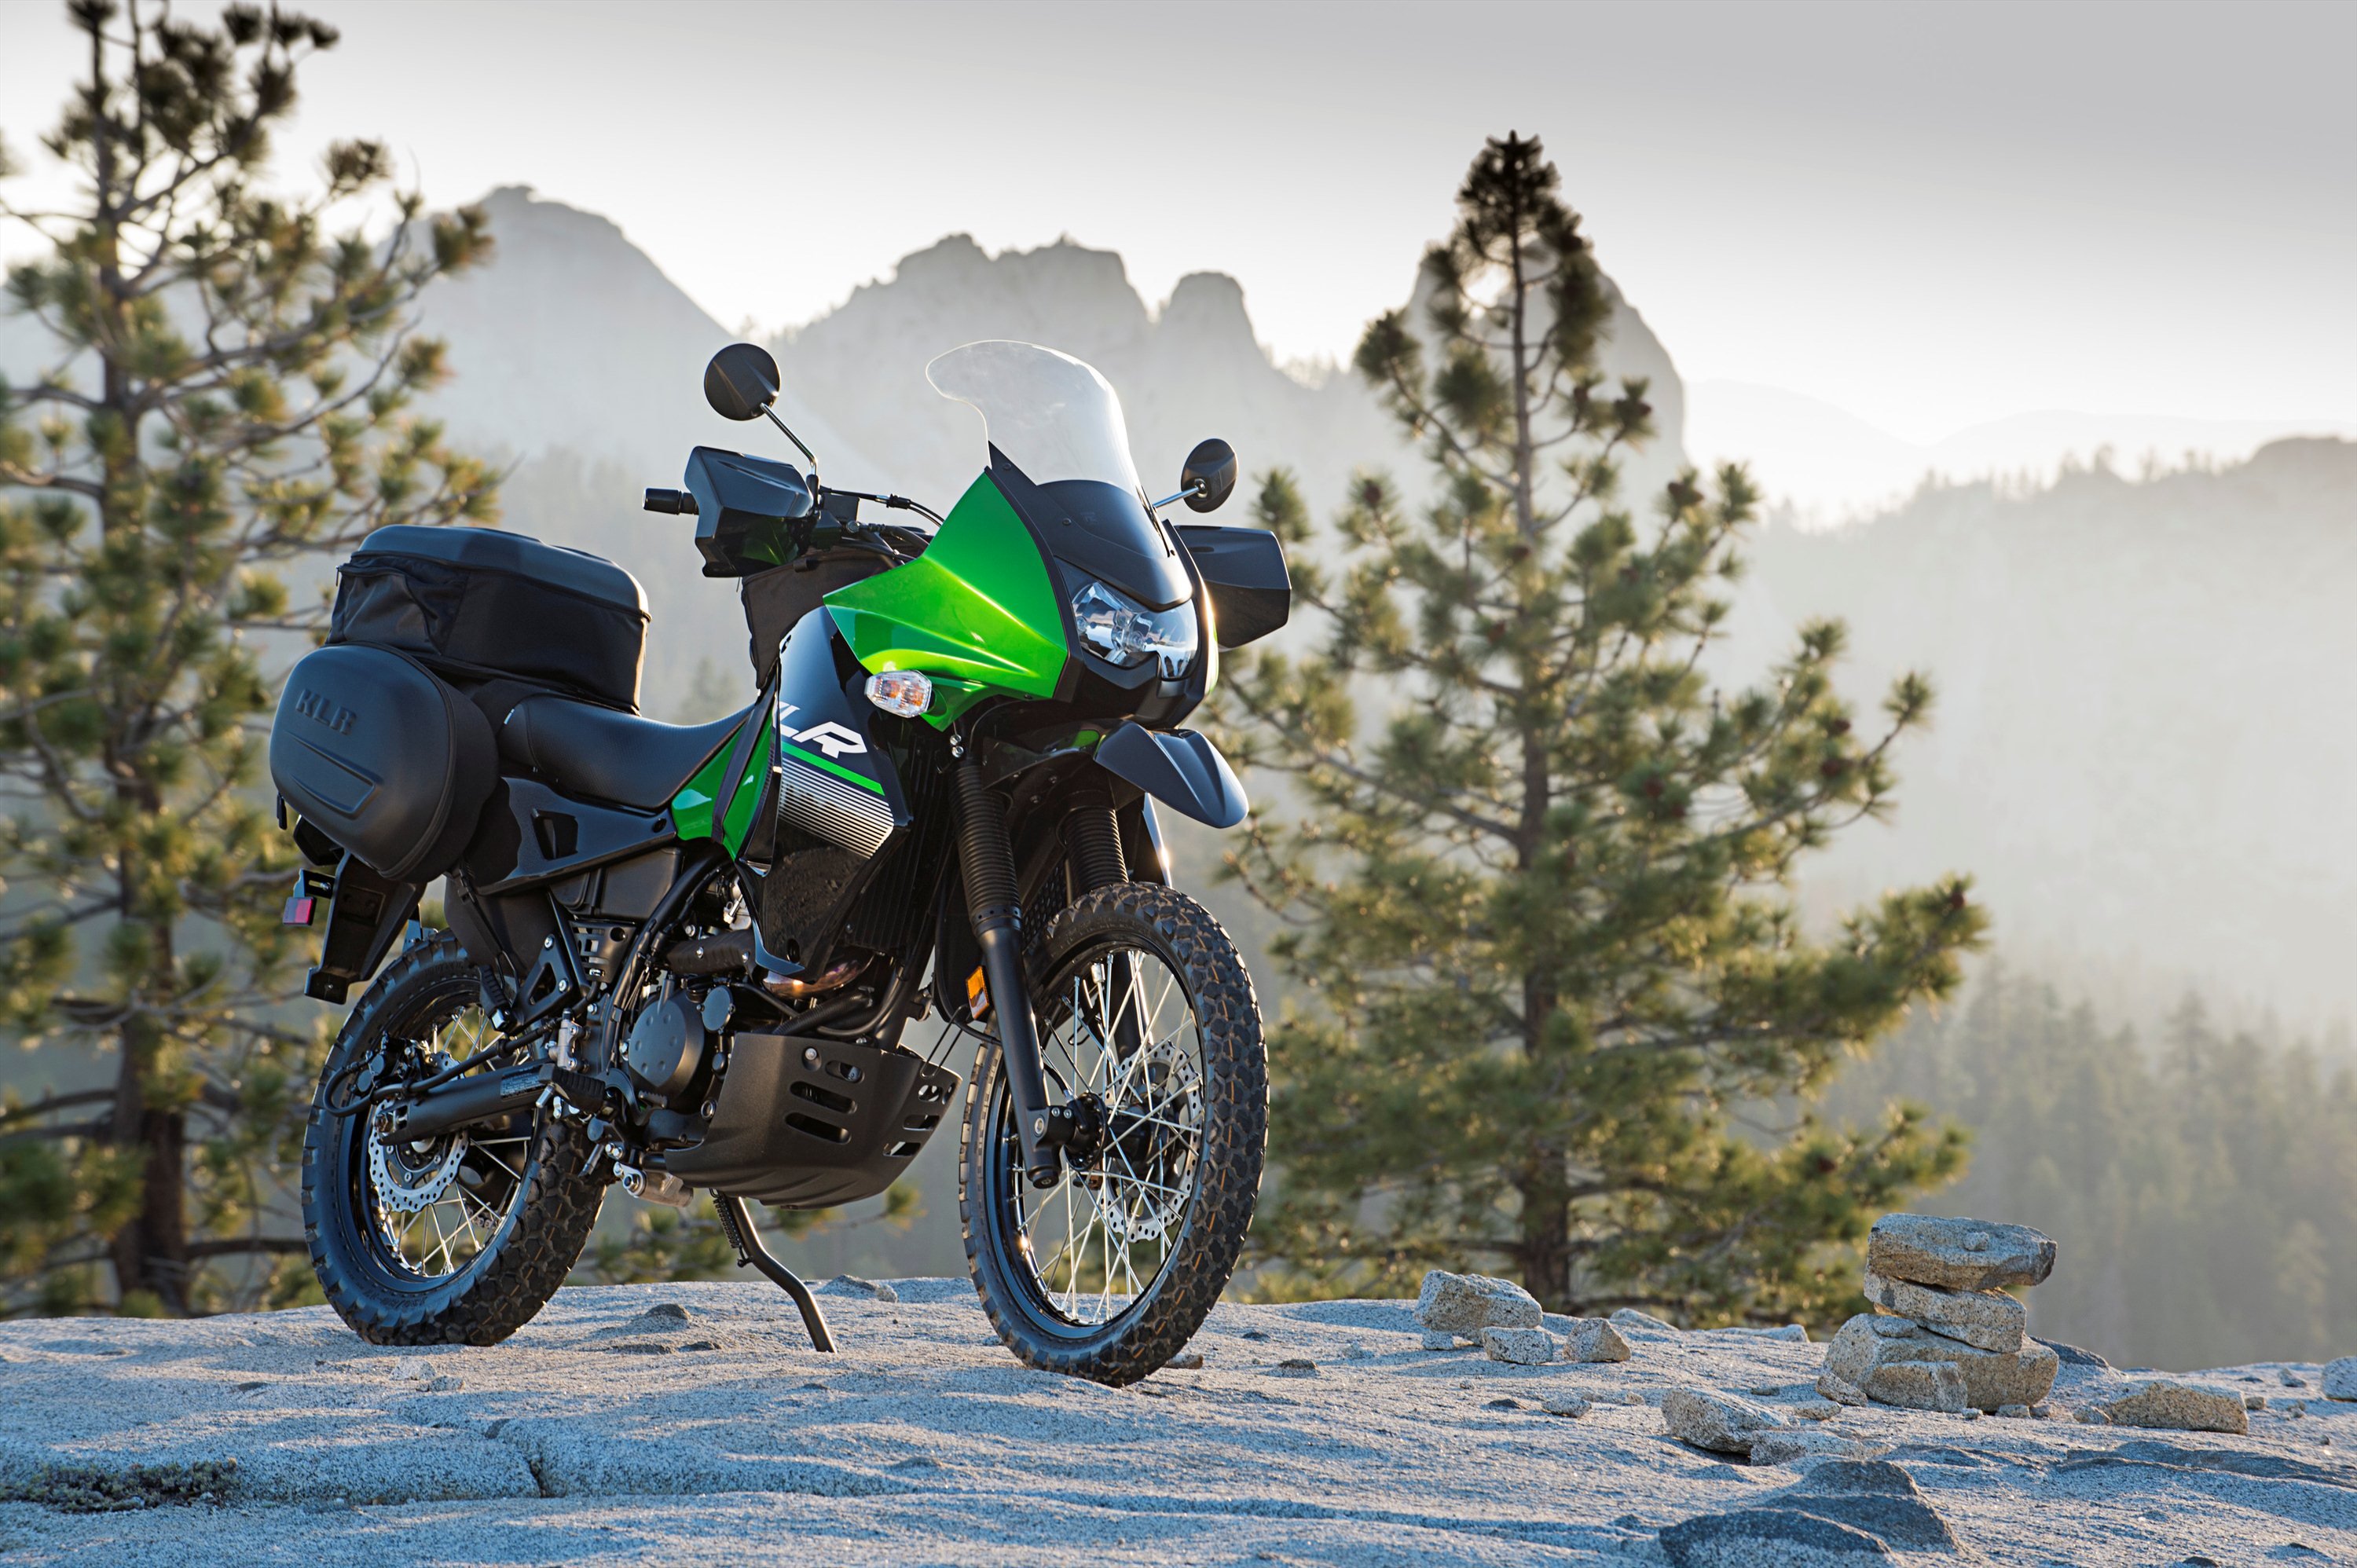 Best Motorcycle Tyre and Size Guide for the Kawasaki KLR 